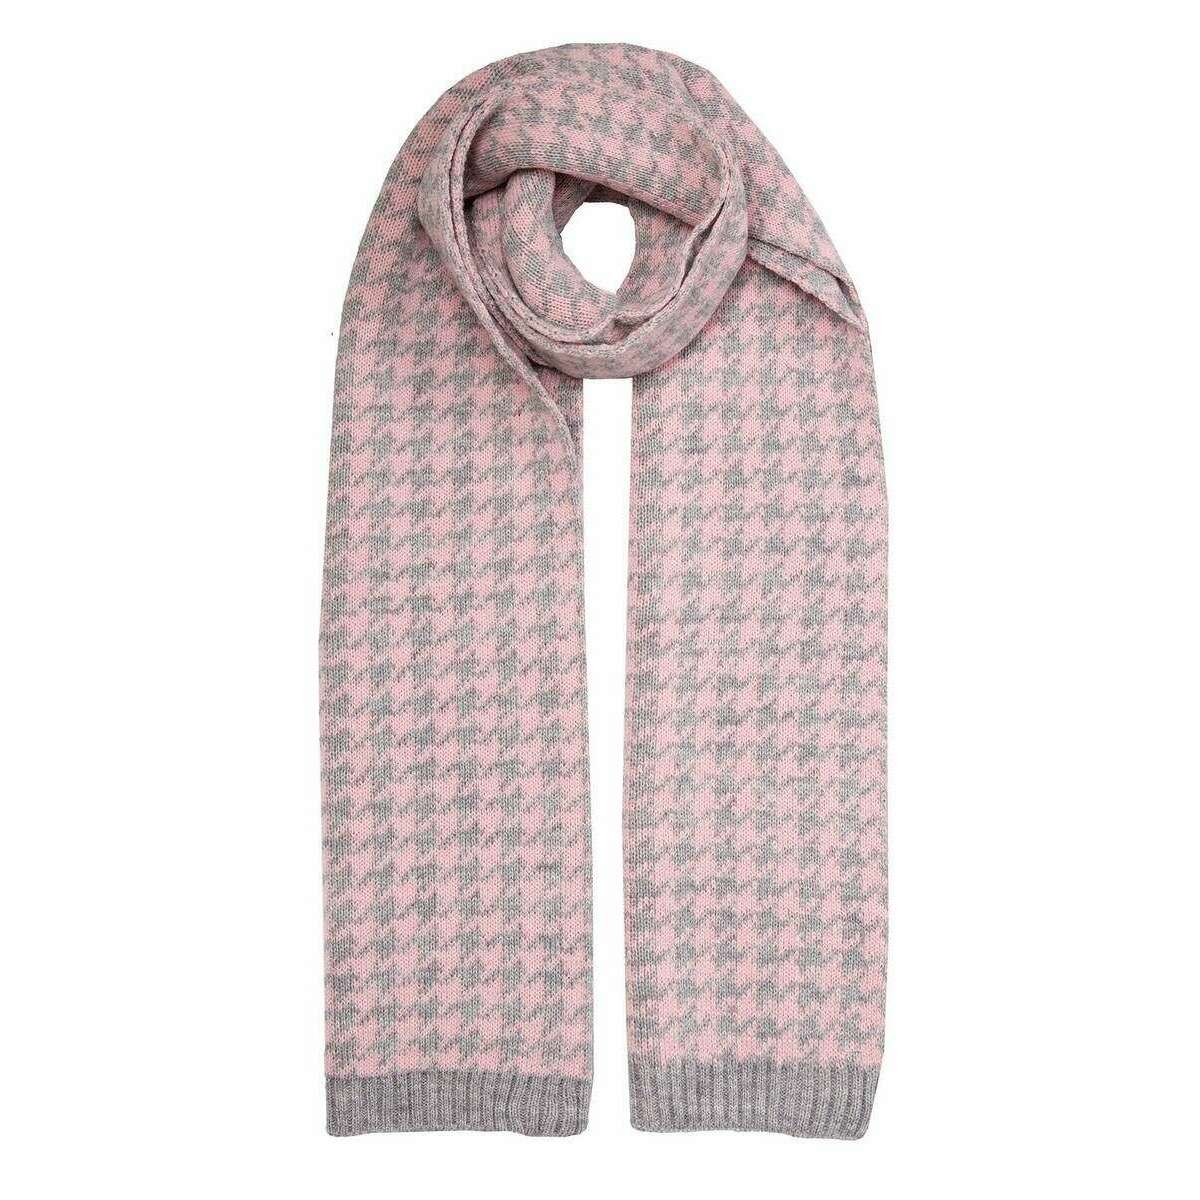 Dents Jacquard Dogtooth Pattern Knitted Scarf - Dove Grey/Blush Pink